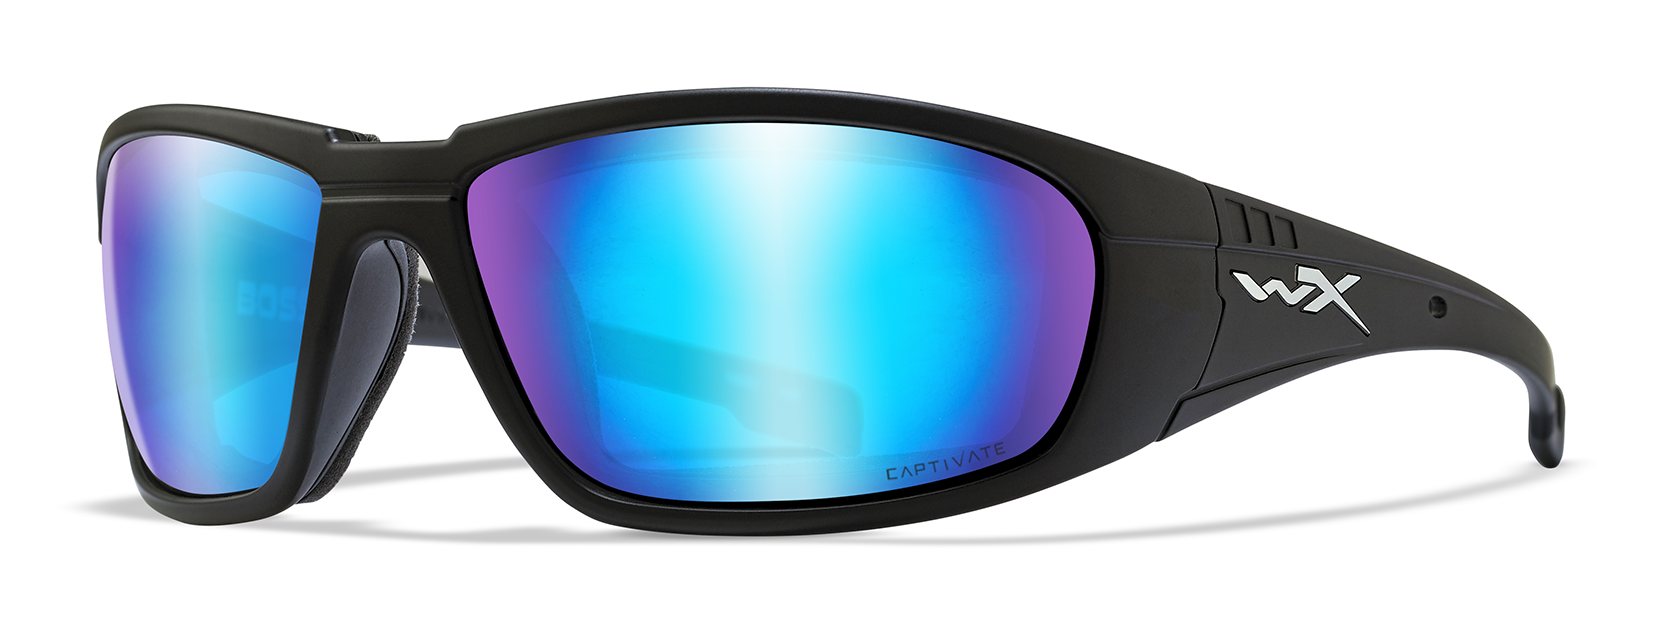 wiley x boss fishing sunglasses for big heads in black with blue mirror lenses